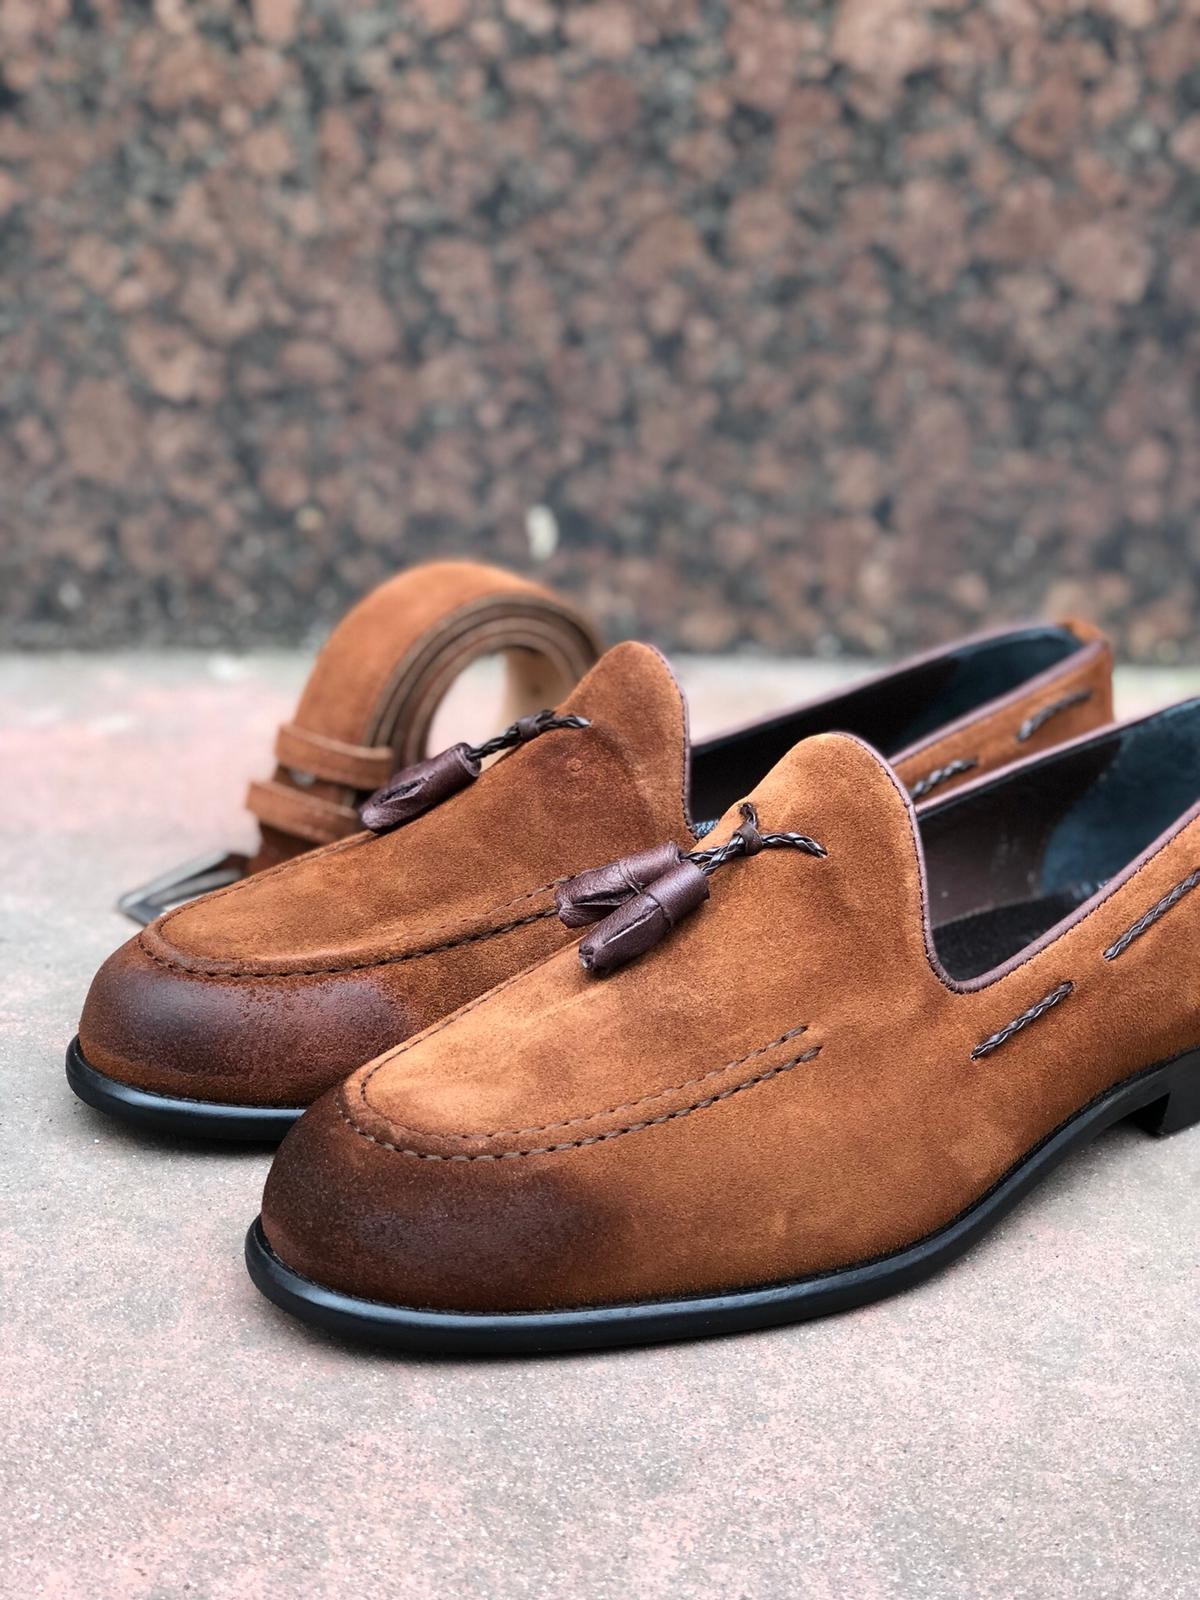 Buy Tan Suede Tassel Loafer by Gentwith.com with Free Shipping